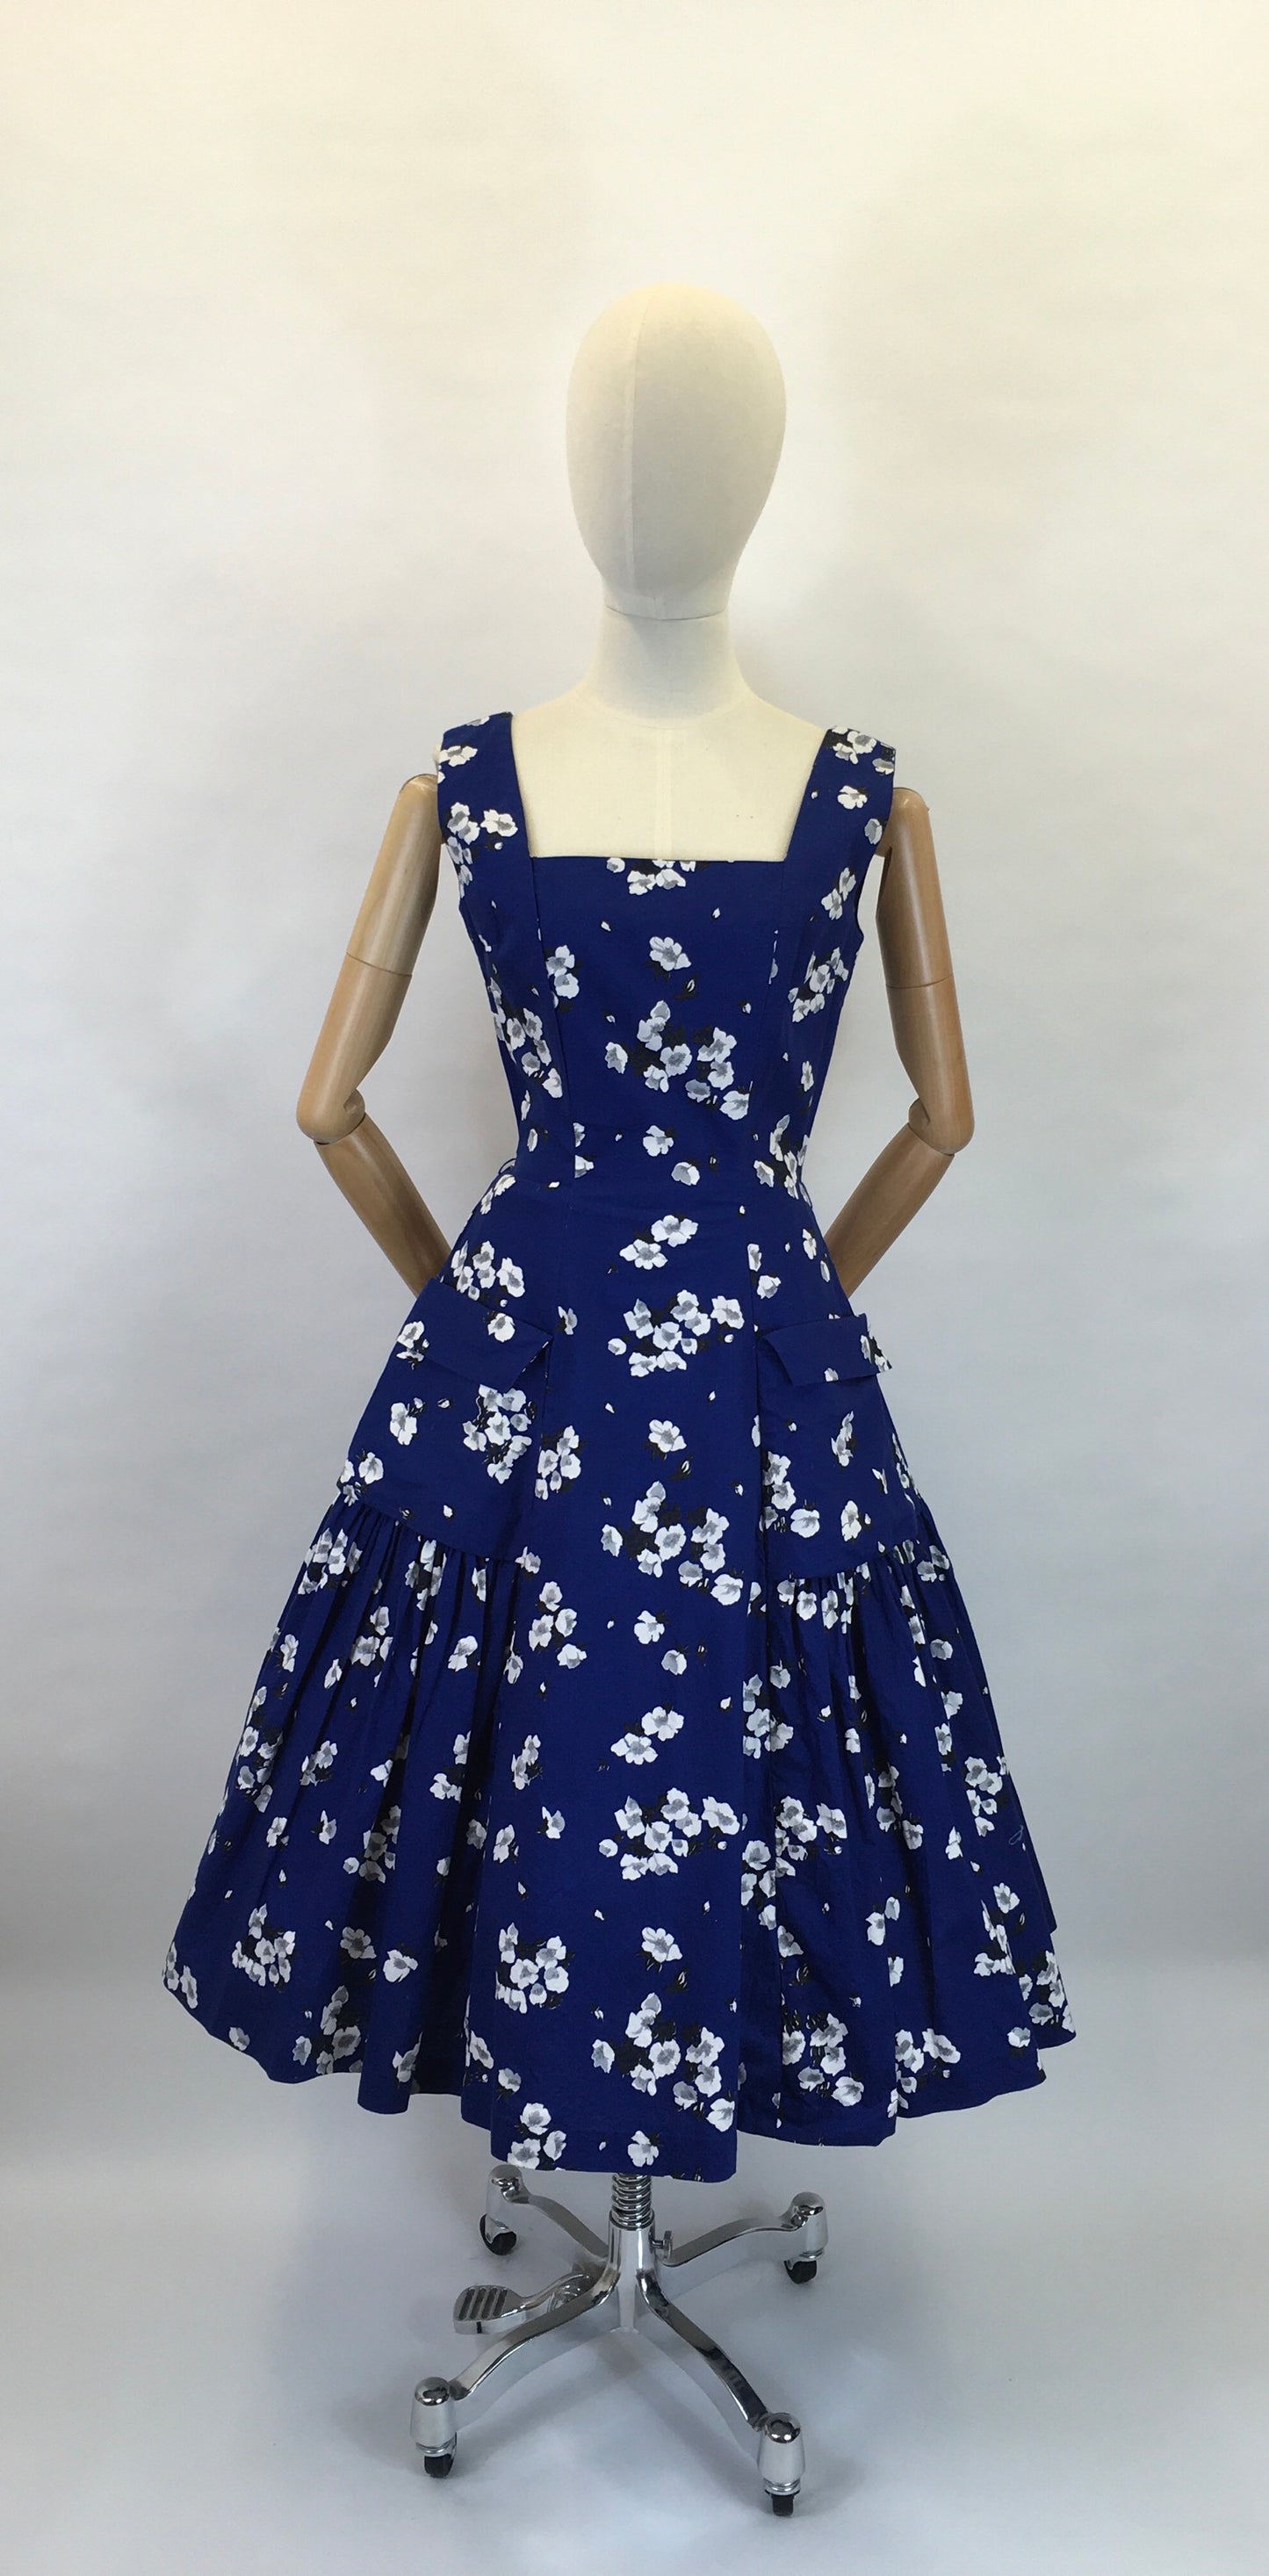 Original 1950’s STUNNING ‘ Horrockses Fashions ‘ Cotton Dress - In Rich Navy, Deep Charcoals and Soft Grey